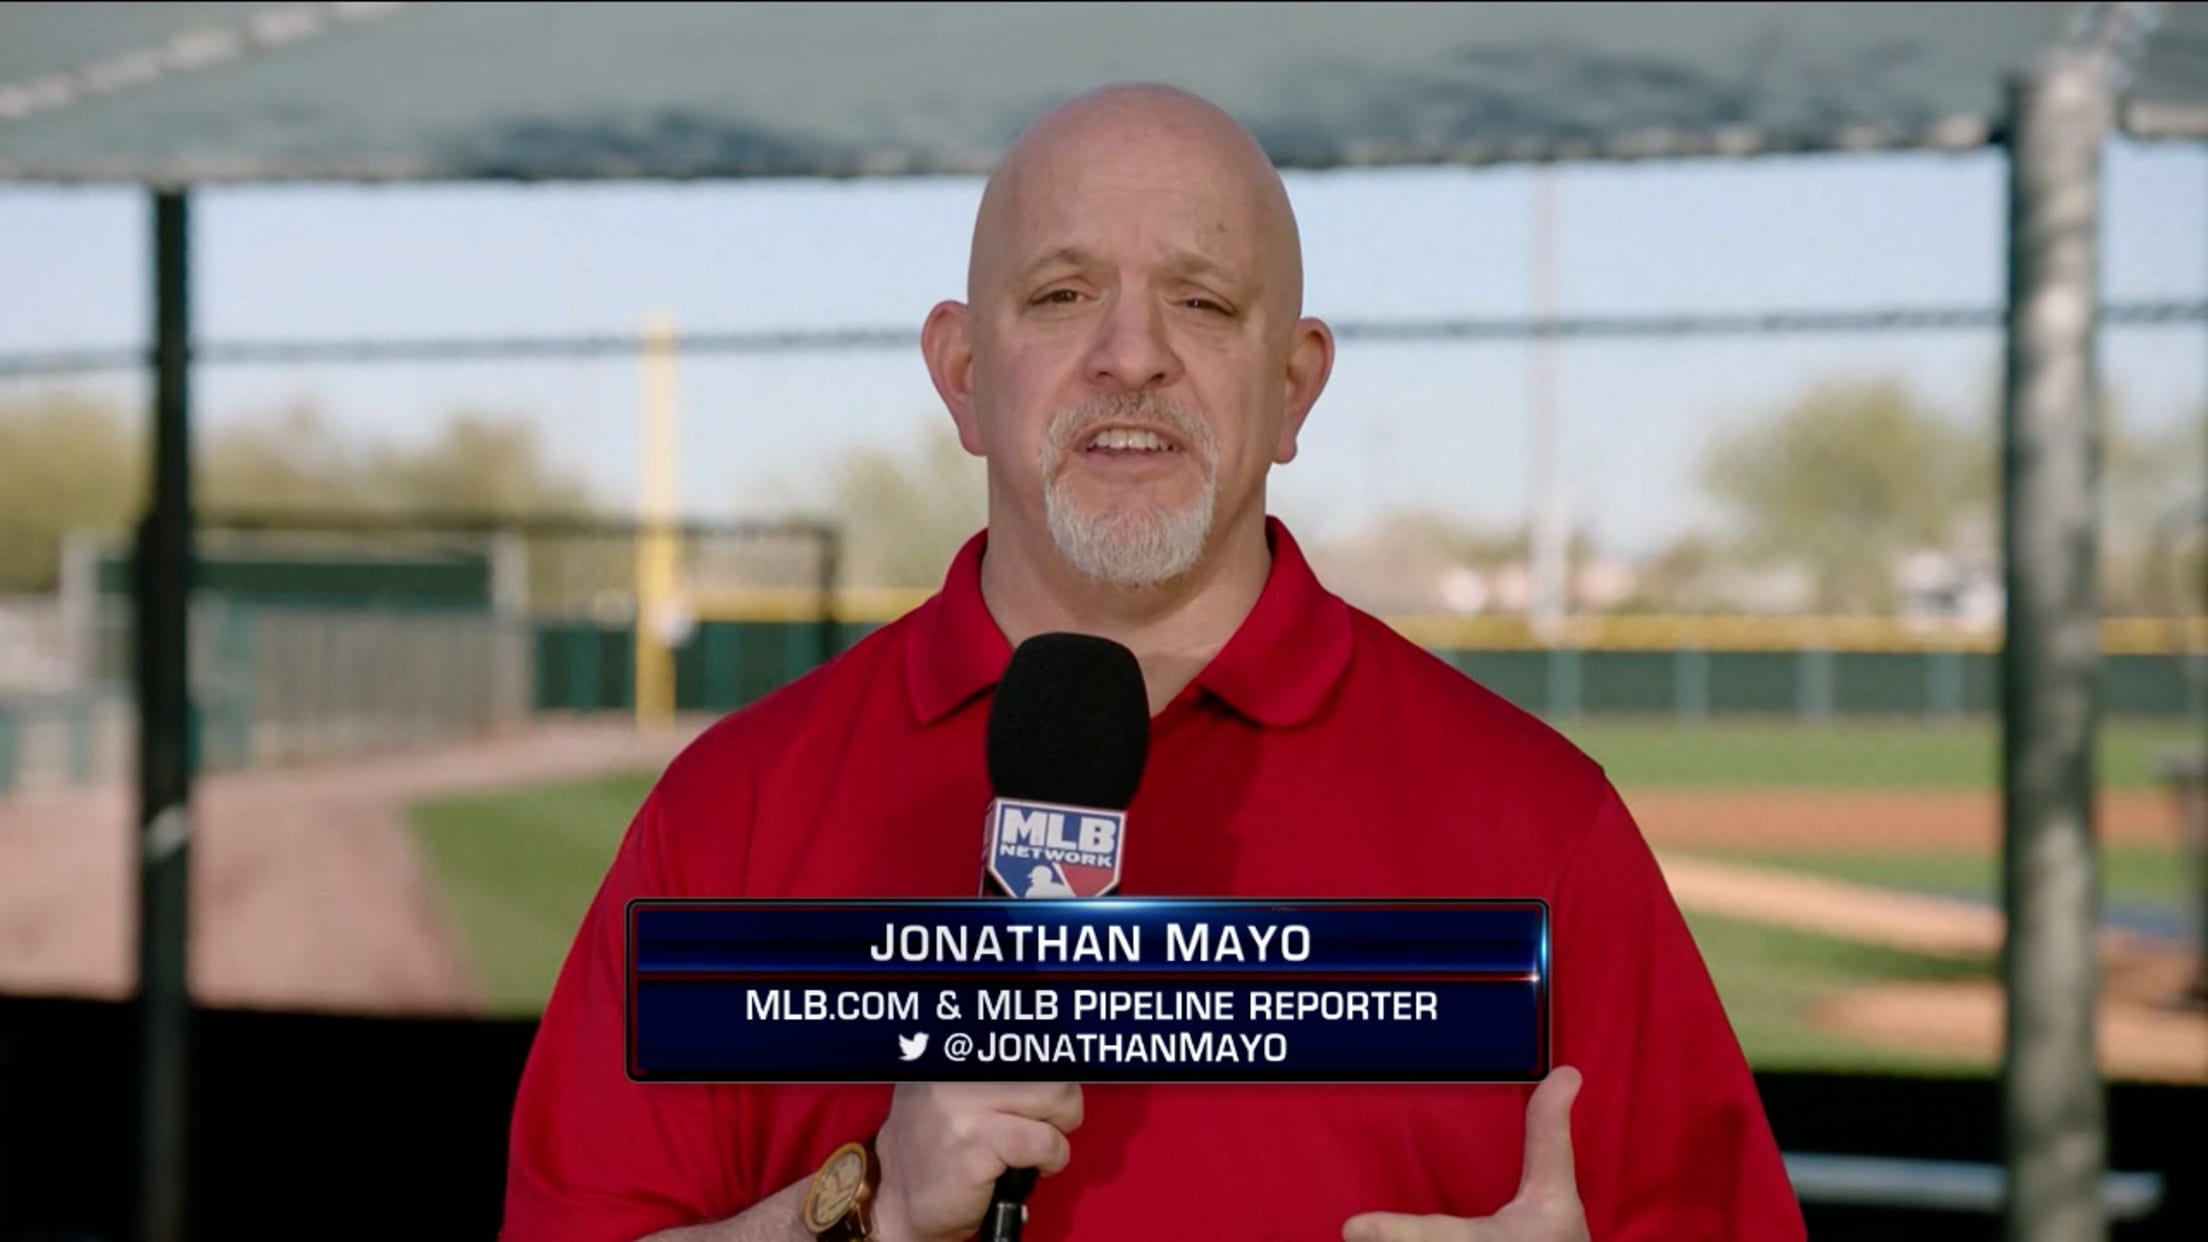 Mayo on Angels' top prospects